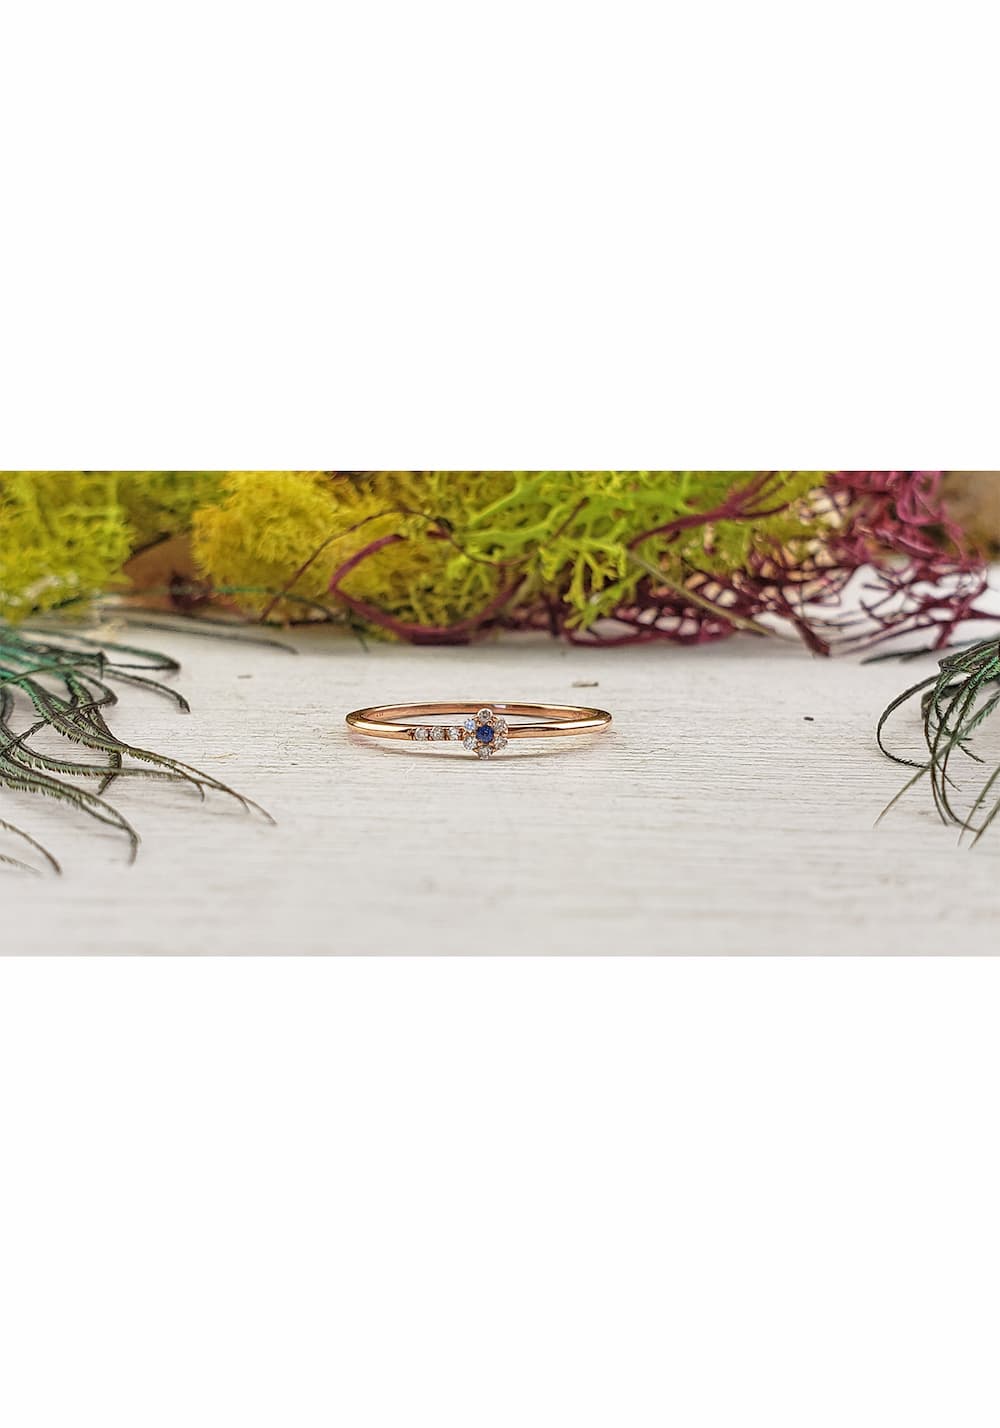 10K ROSE GOLD SAPPHIRE GEMSTONE FLORAL RING WITH WHITE DIAMONDS